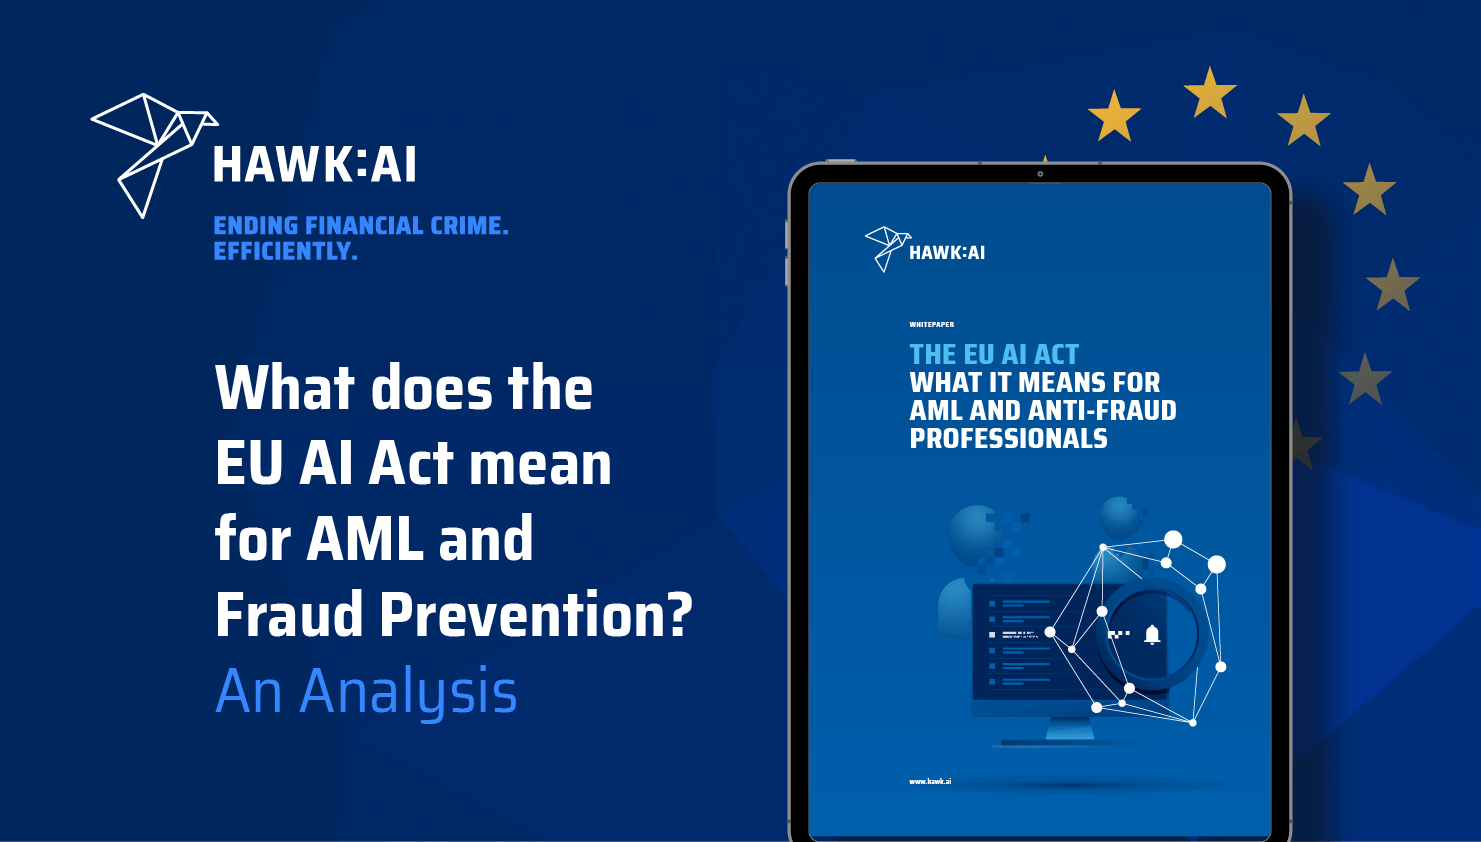 What the EU AI Act means for AML and Fraud Prevention